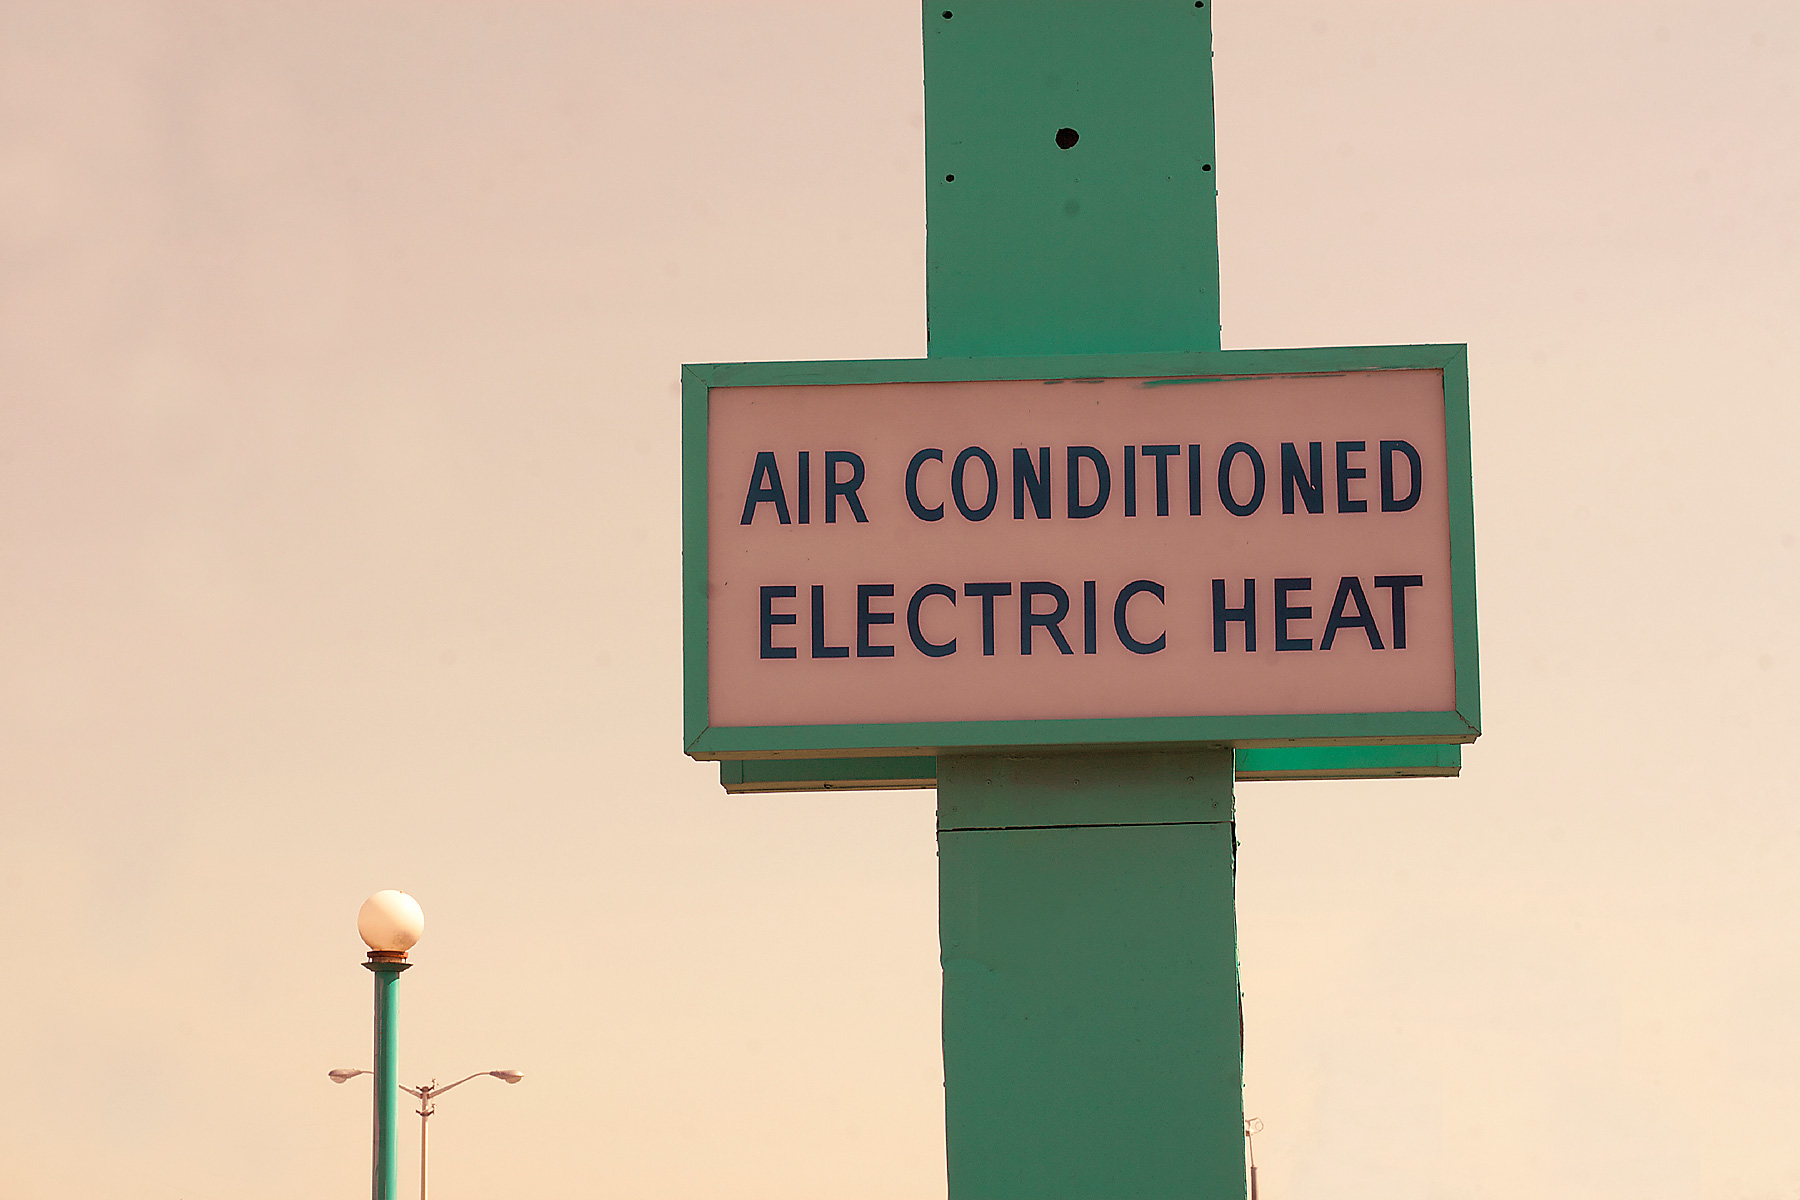 Air Conditioned Electric Heat